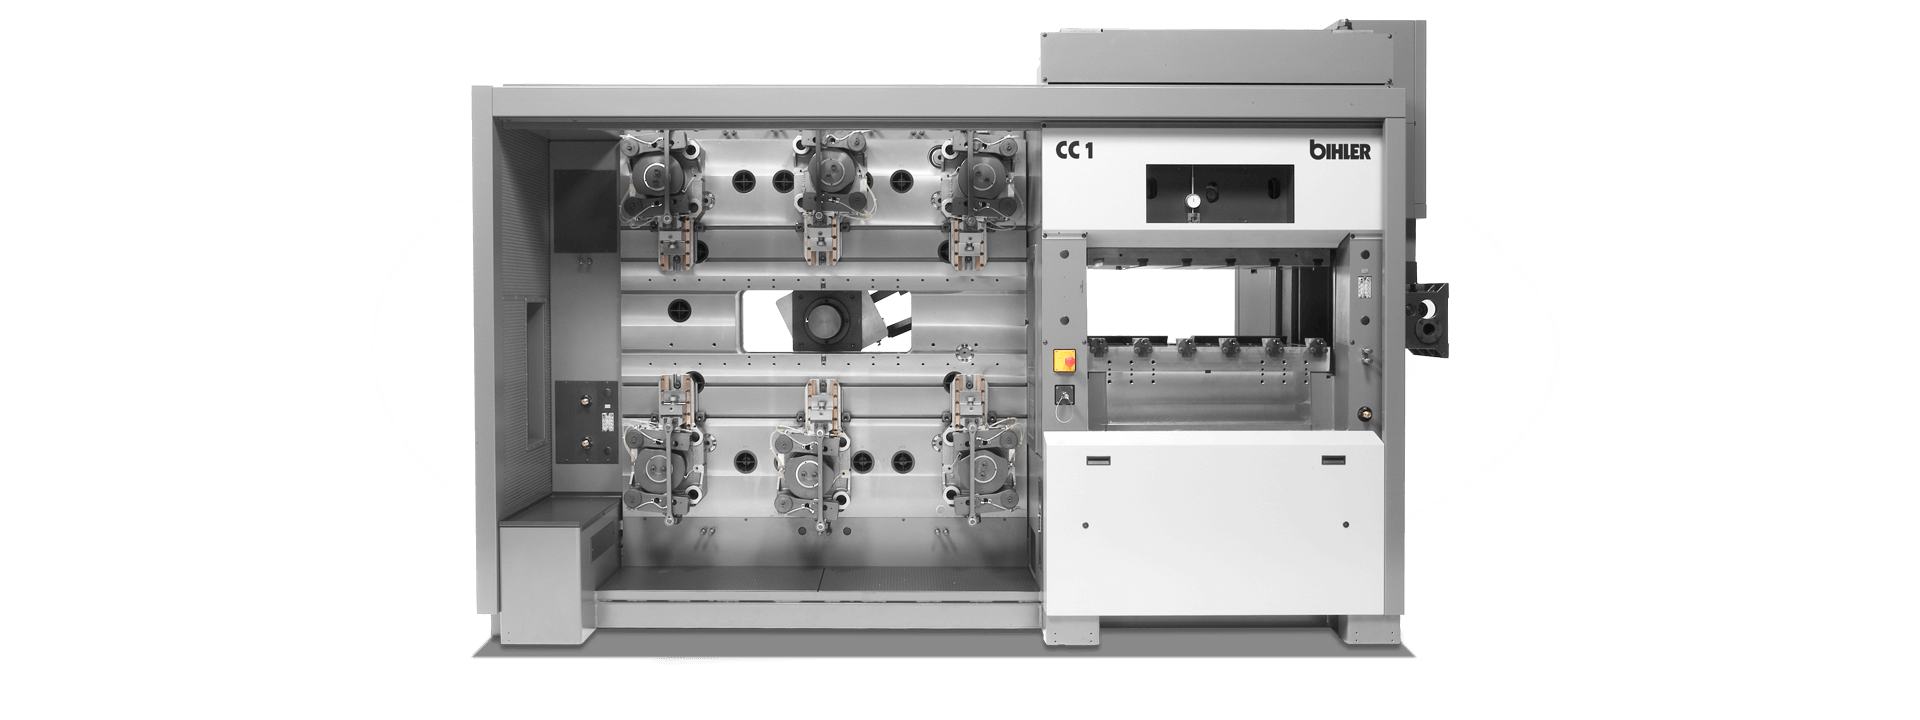 Bihler Processing Center COMBITEC CC 1 for stamped and formed parts and sub-assemblies (multislide machine)